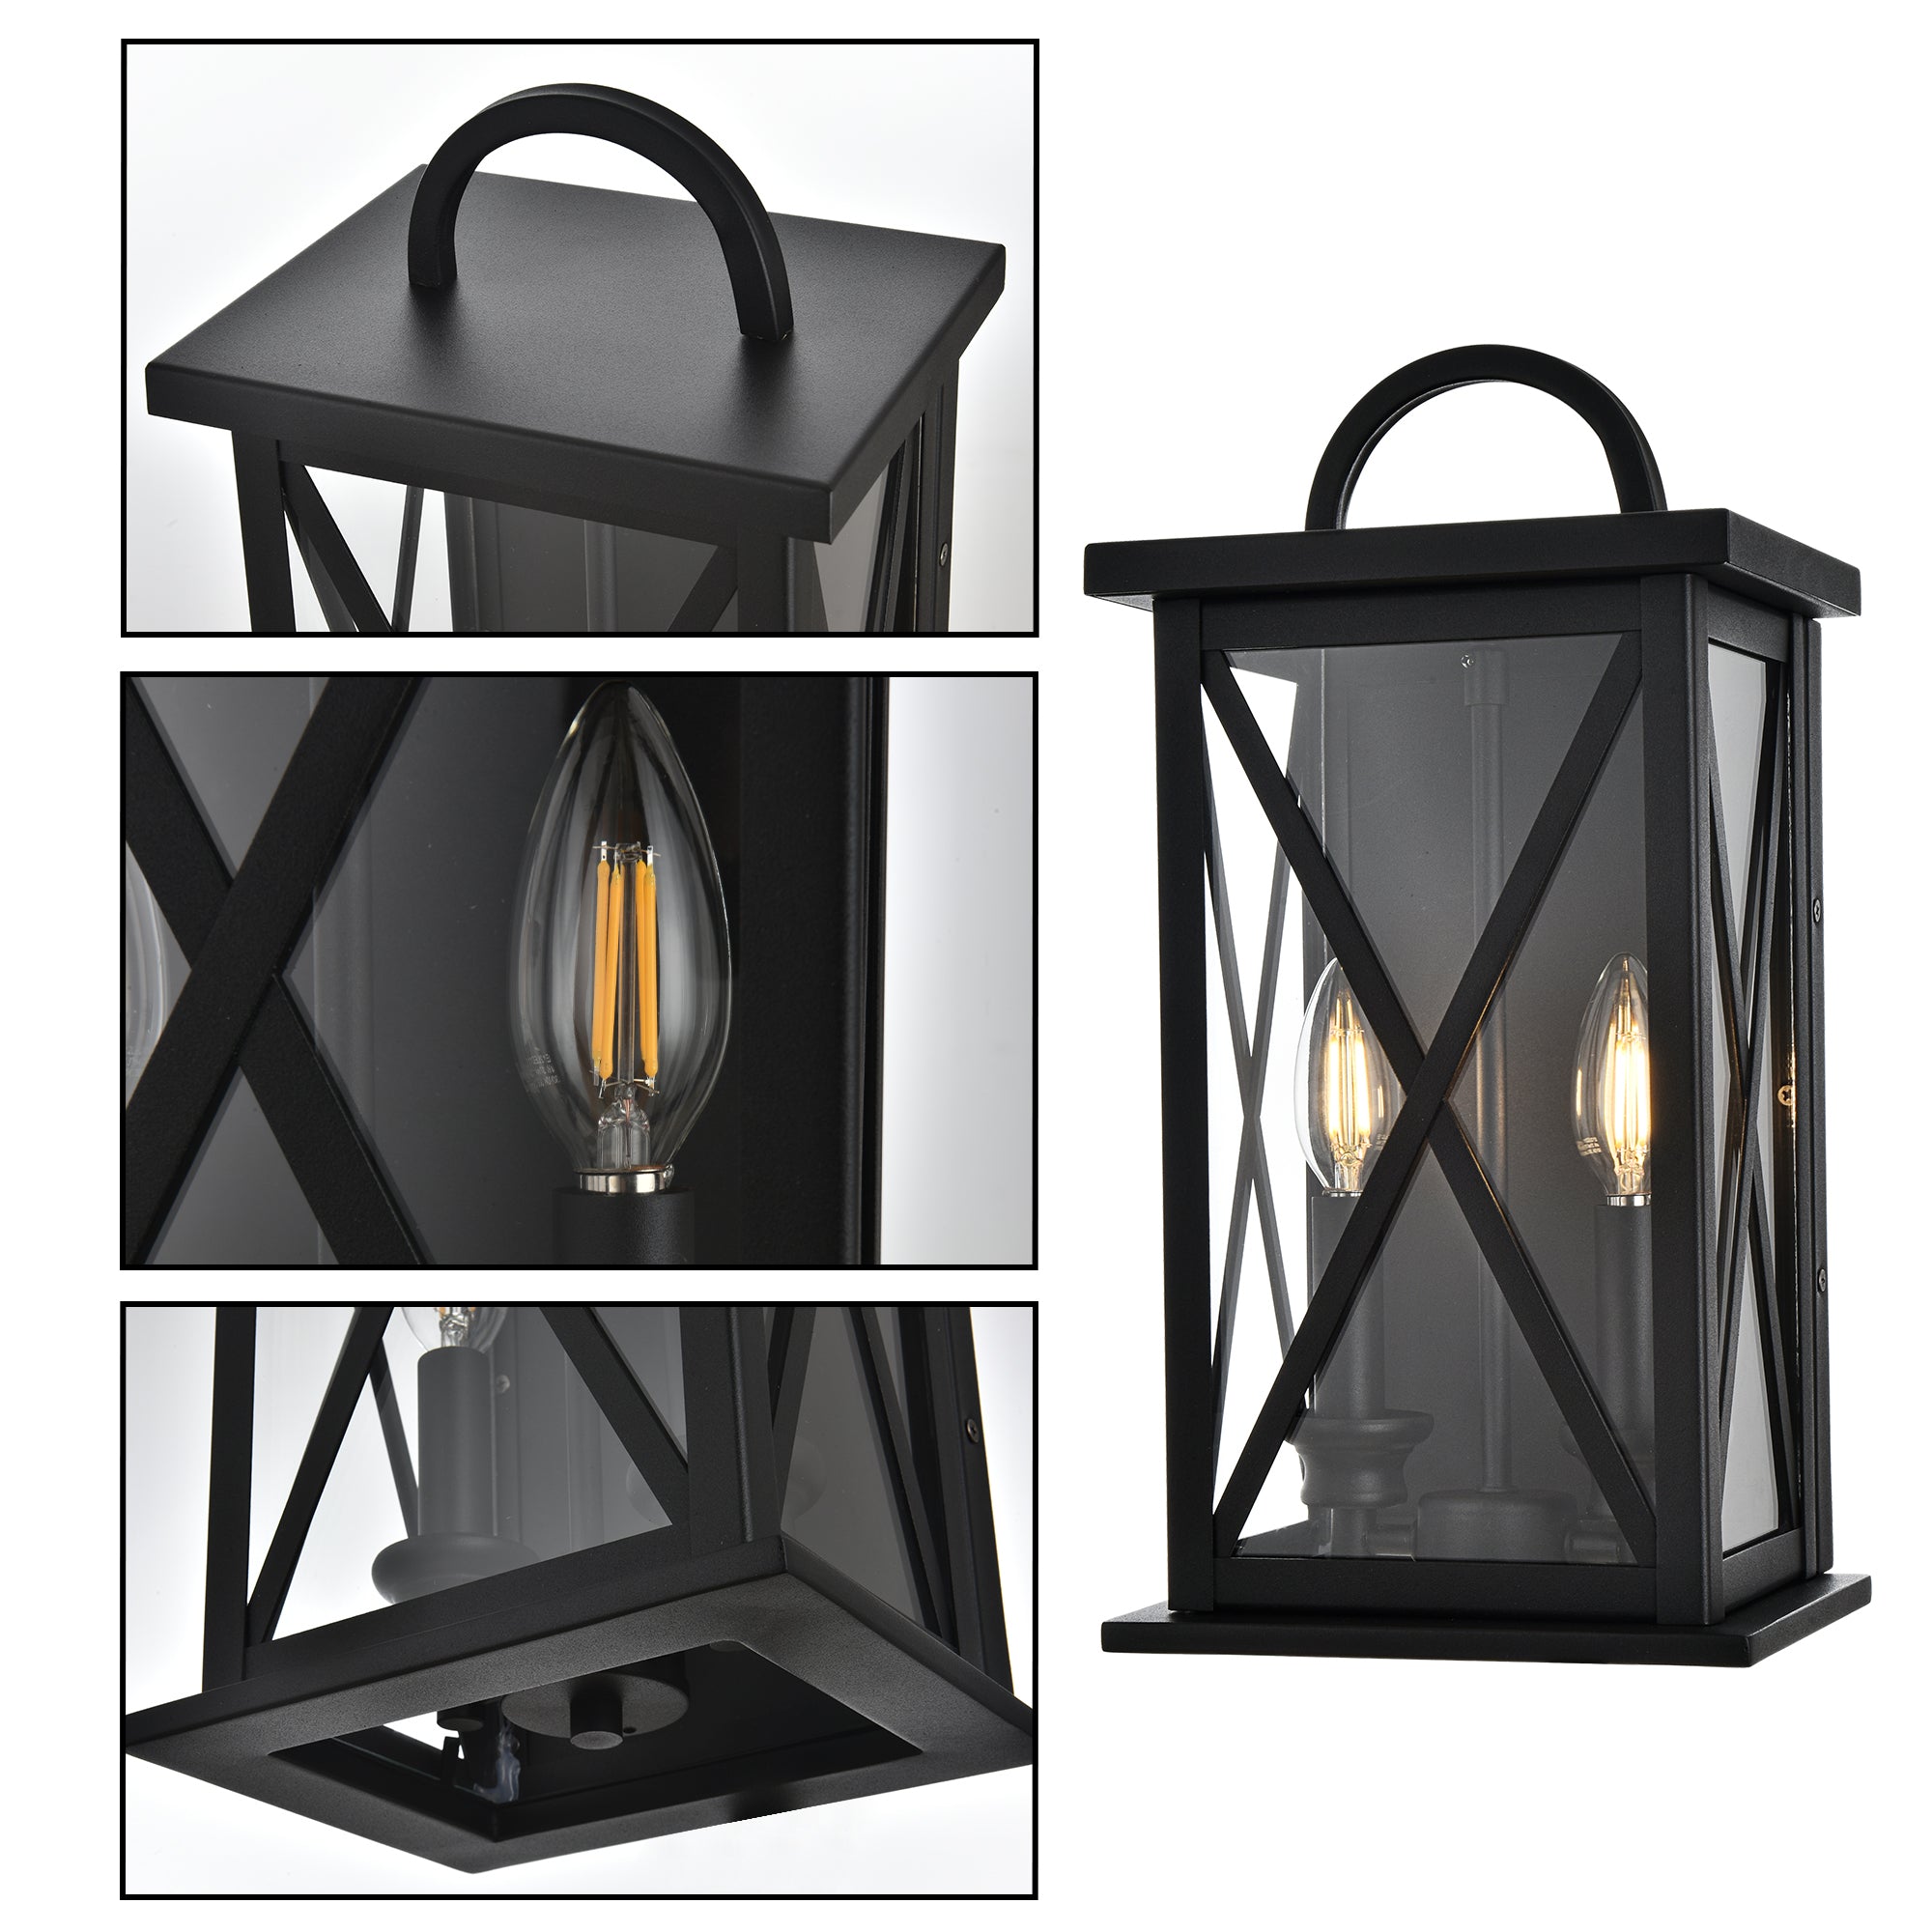 2-Light Exterior Light Fixtures Outdoor Wall Lantern Wall Mount in Black Finish Waterproof Wall Sconce with Clear Glass for Porch Front Door Patio Yard Garage